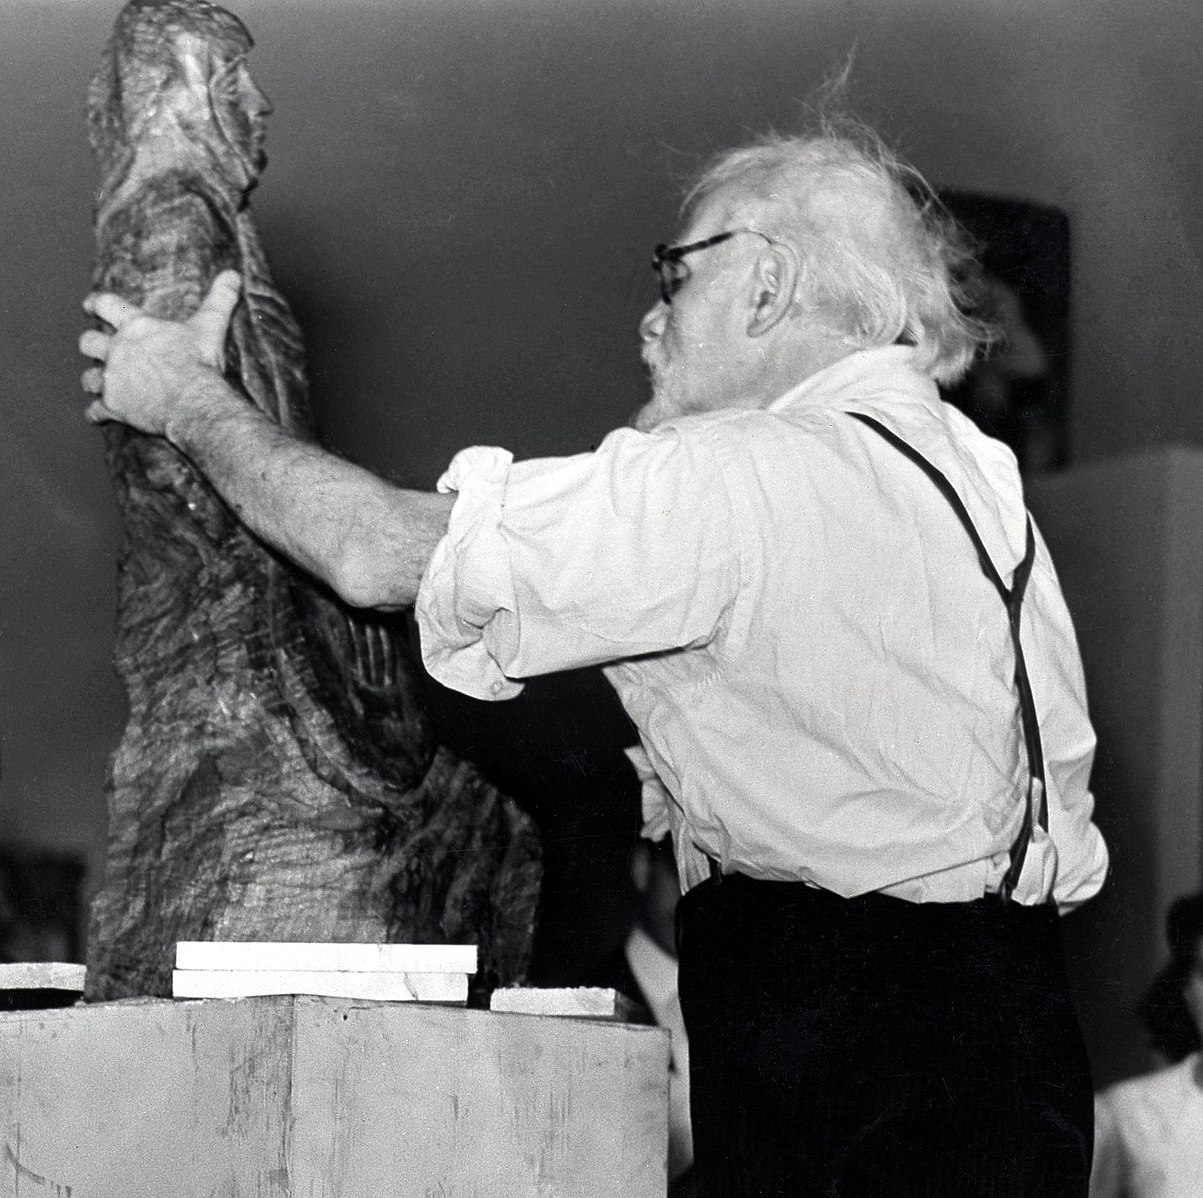 Glicenstein at work on a wood carving